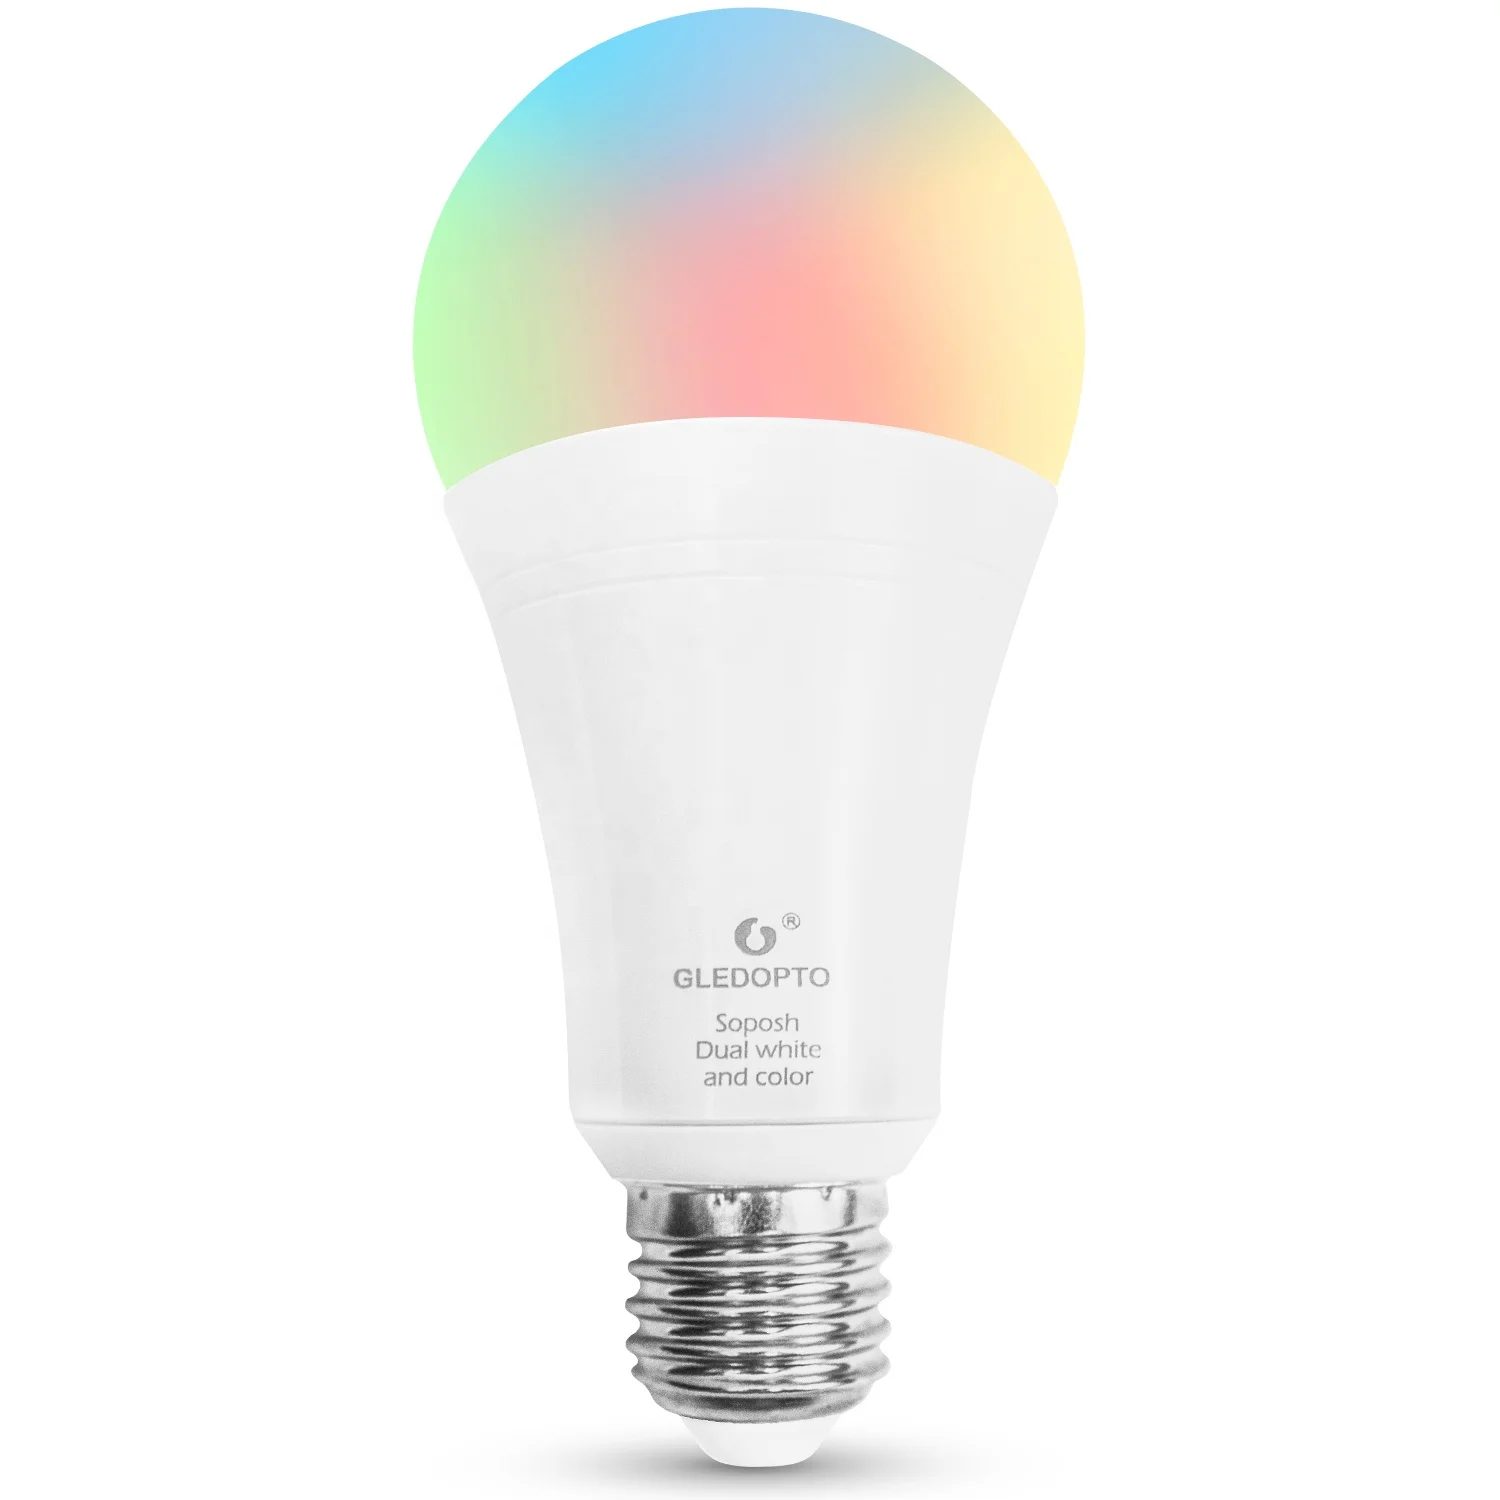 Soft White Bulb ZigBee App Control LED Light Bulb Replacement Remote Controlled RGBW Colorful Ecosmart Light Bulbs